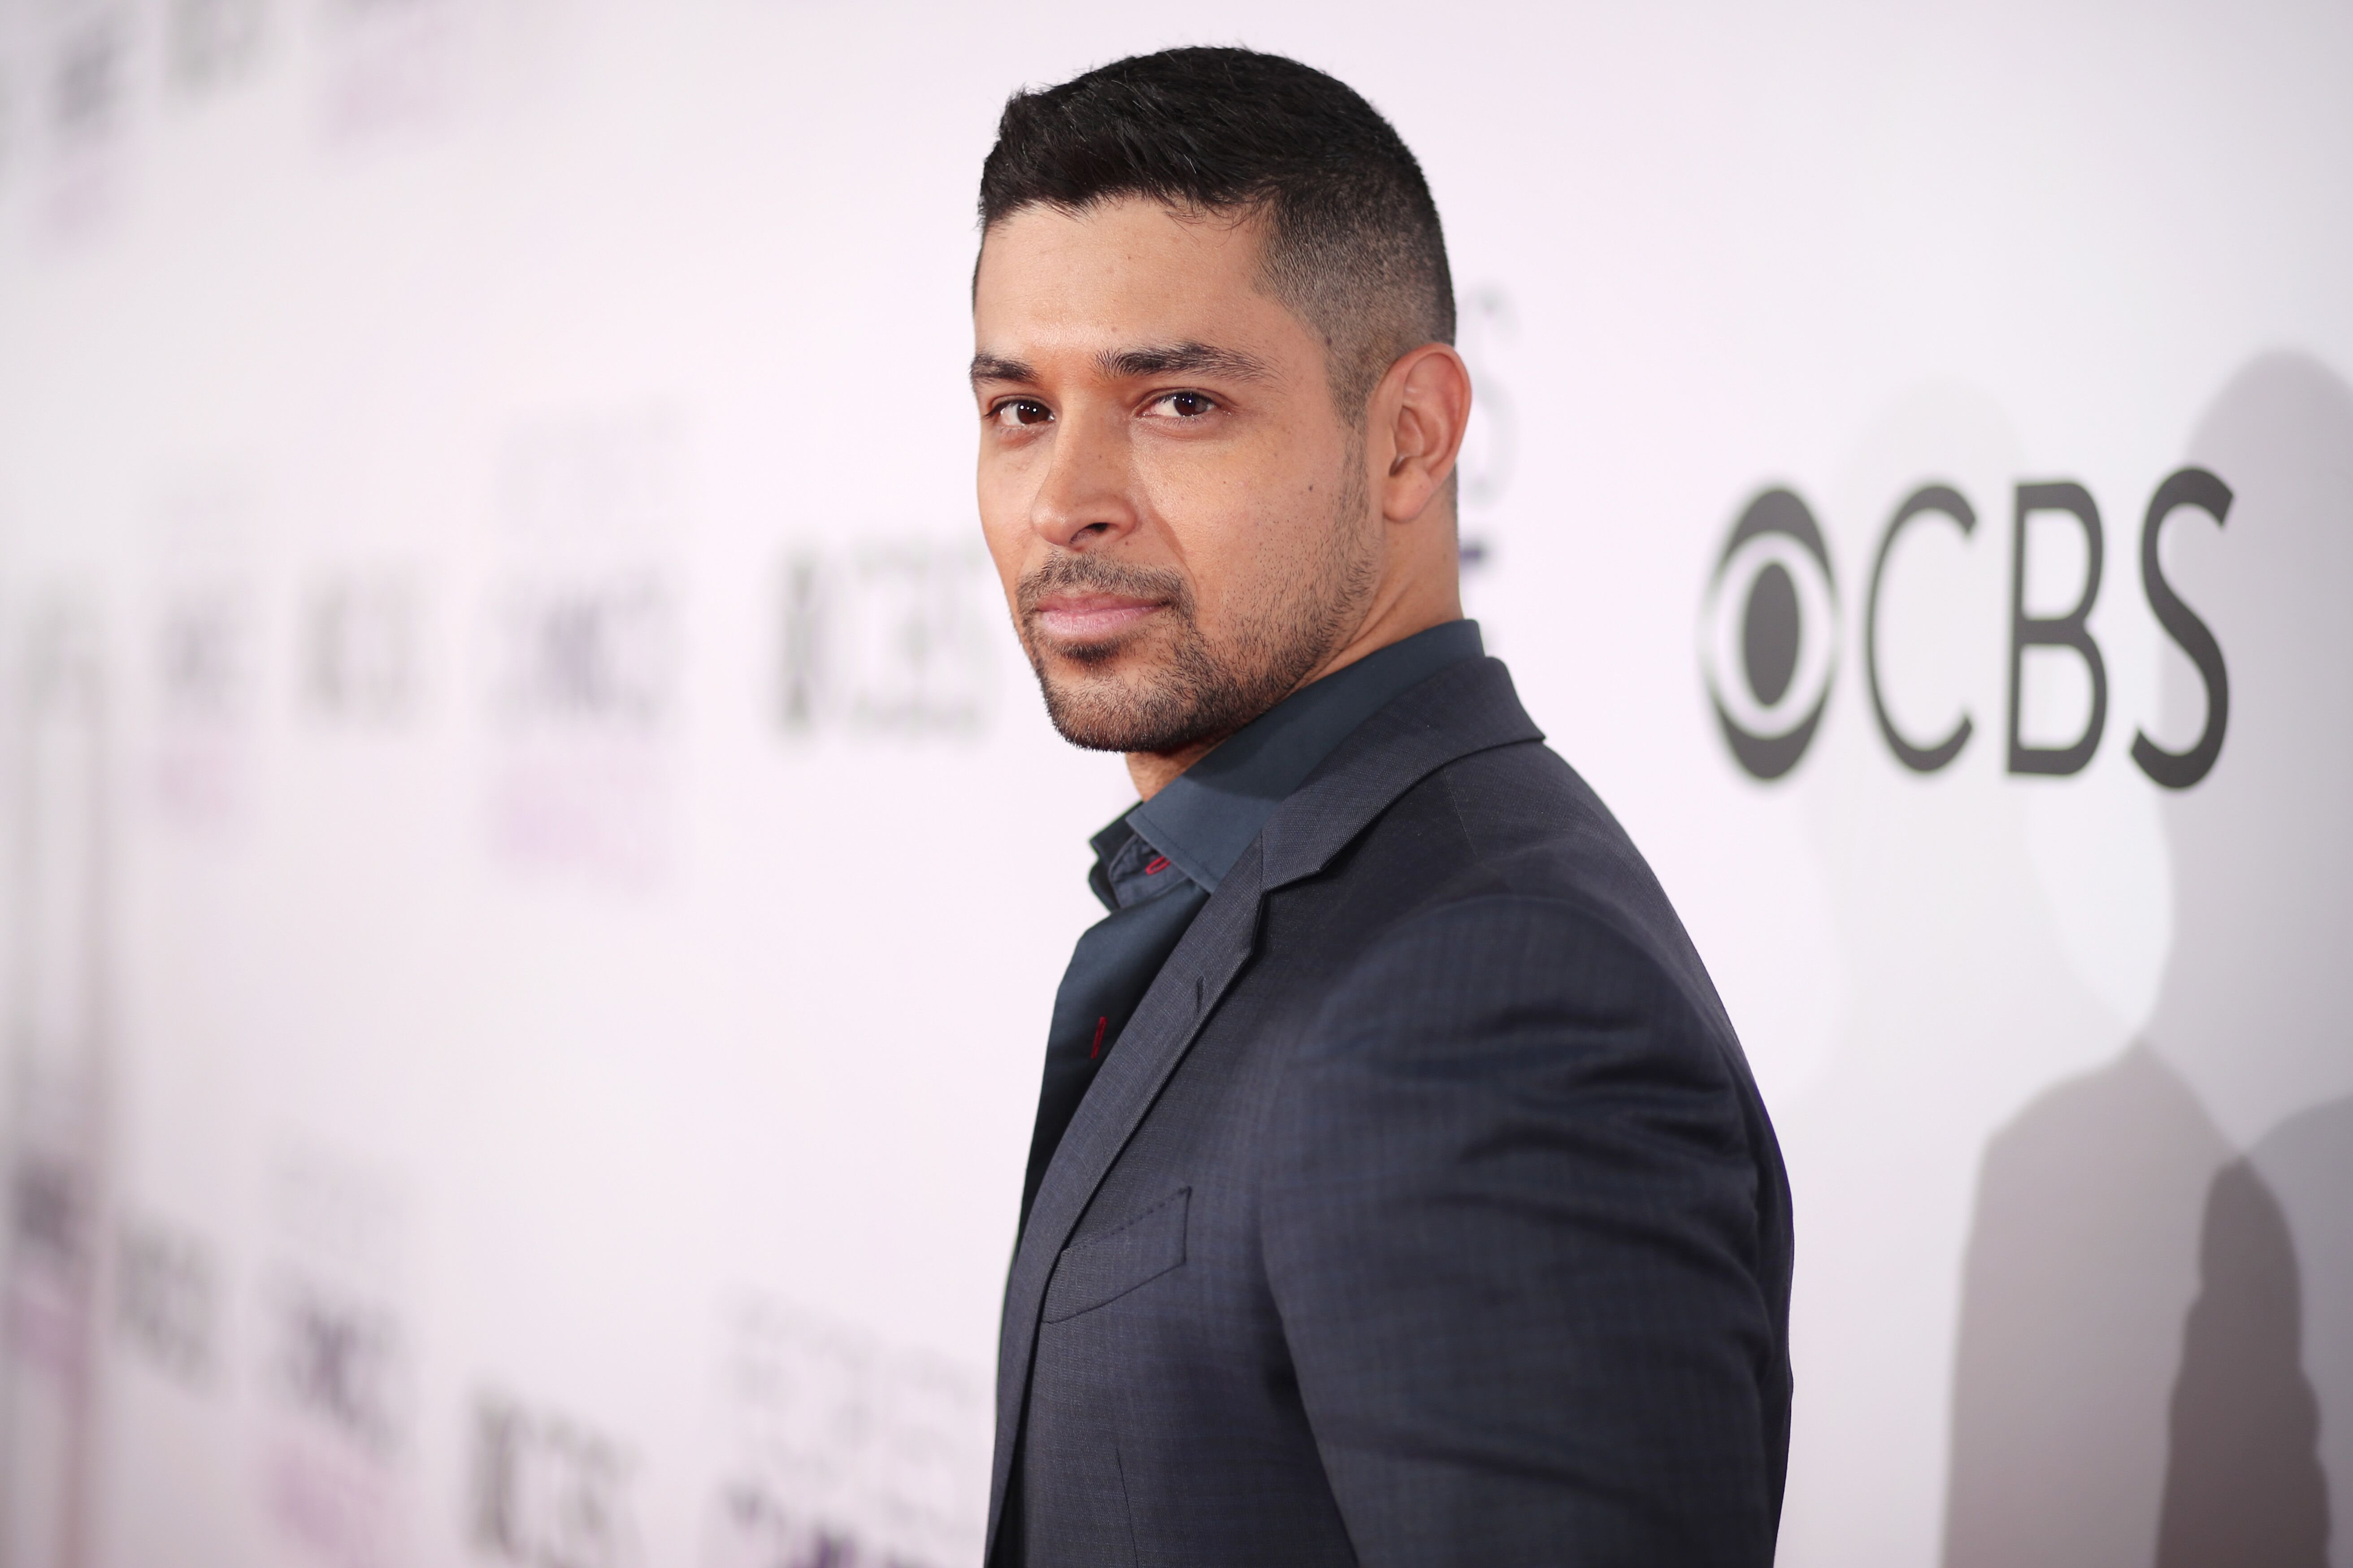 Wilmer Valderrama attends the People's Choice Awards 2017 at Microsoft Theater in Los Angeles, California | Photo: Getty Images